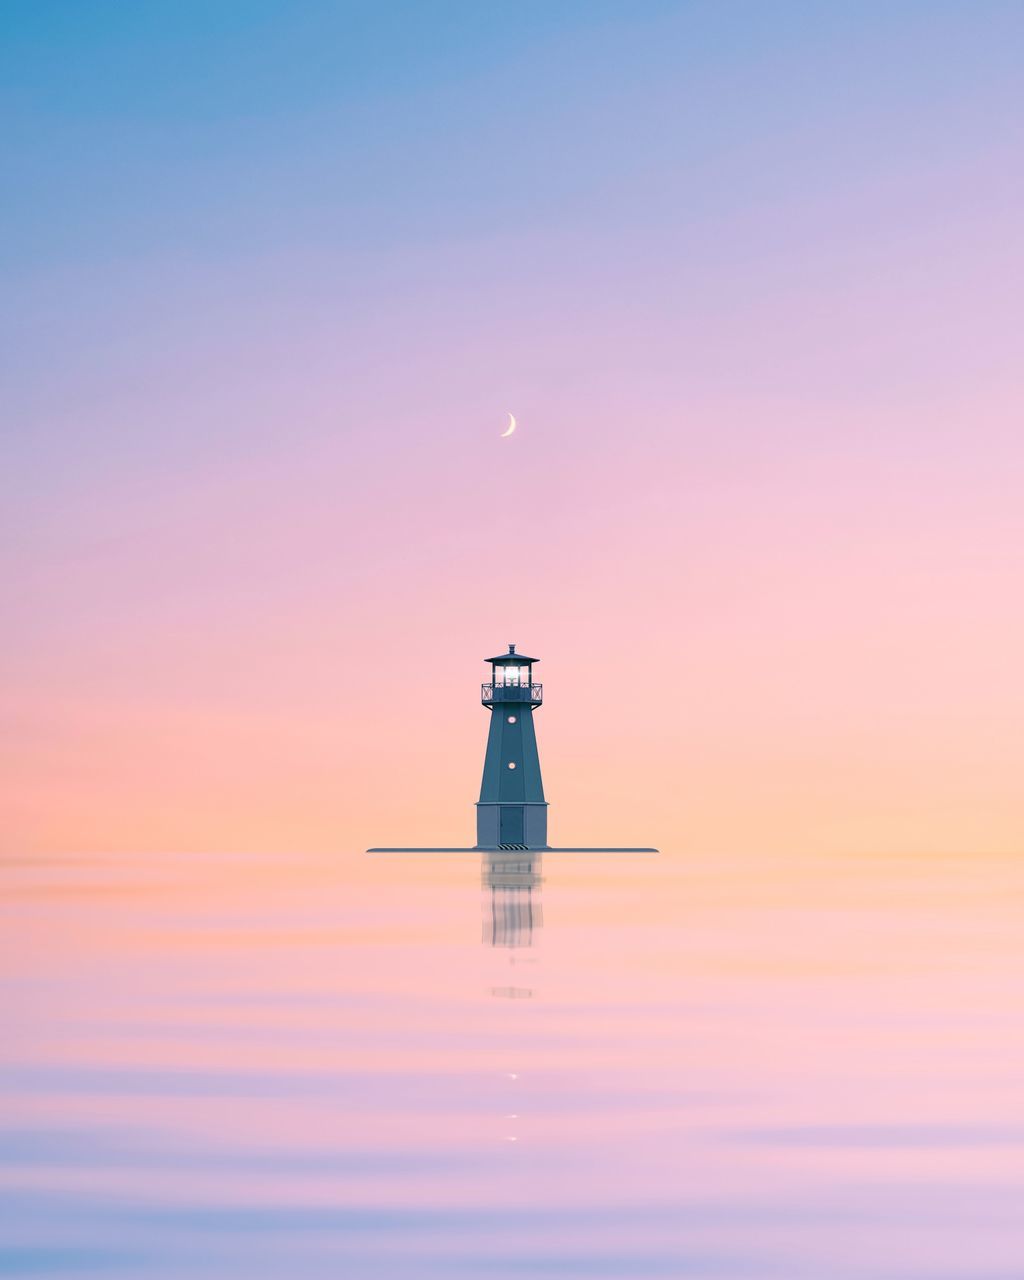 lighthouse, sky, horizon, water, sunset, dawn, tower, sea, nature, guidance, reflection, tranquility, architecture, beauty in nature, built structure, scenics - nature, no people, tranquil scene, copy space, ocean, outdoors, idyllic, travel, cloud, blue, silhouette, building exterior, building, horizon over water, security, transportation, afterglow, orange color, travel destinations